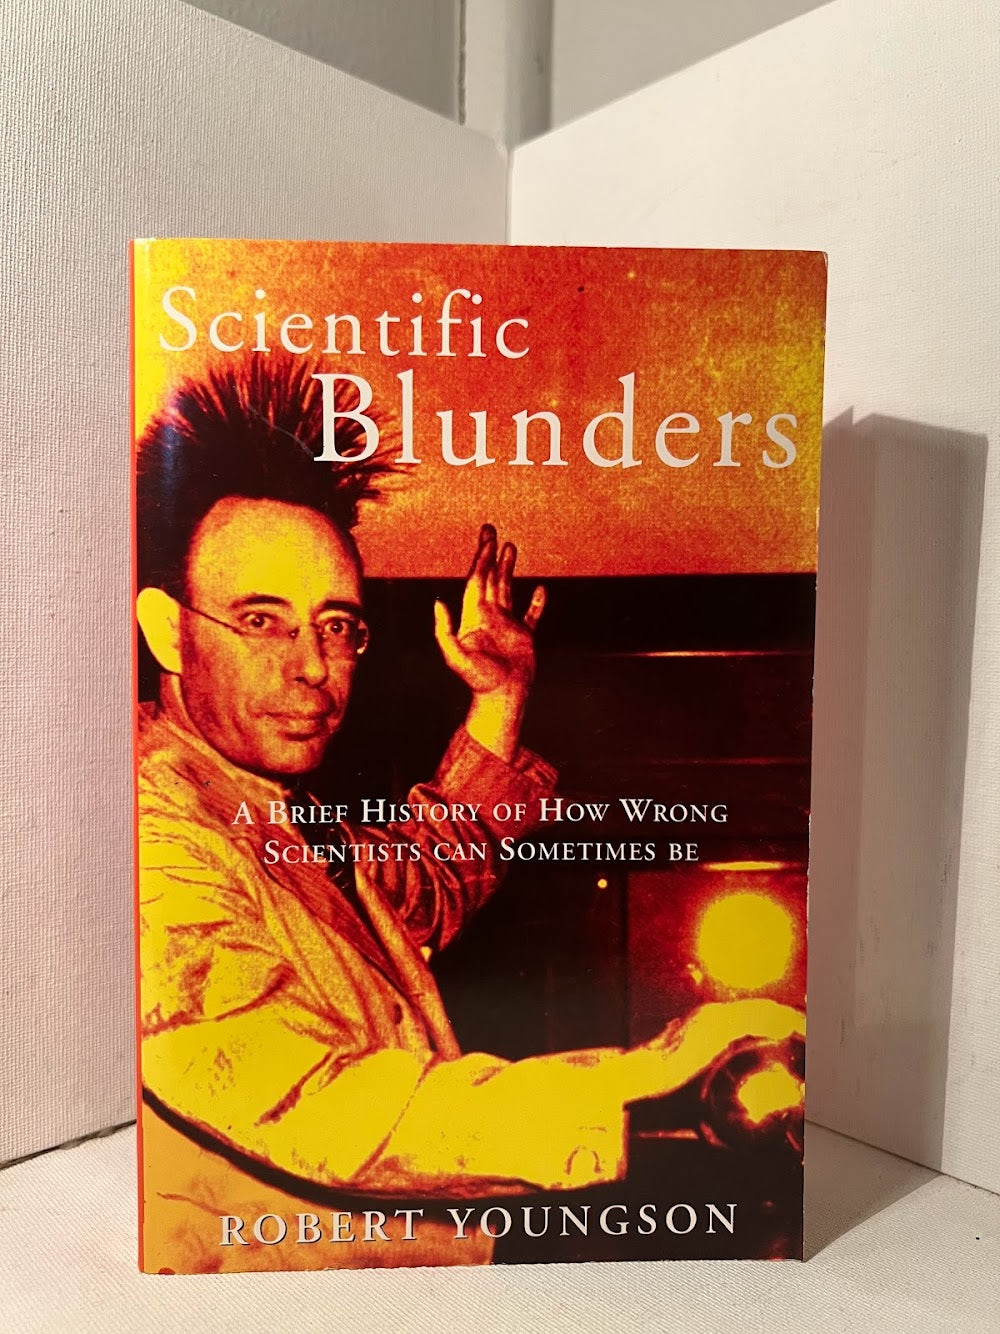 Scientific Blunders by Robert Youngson